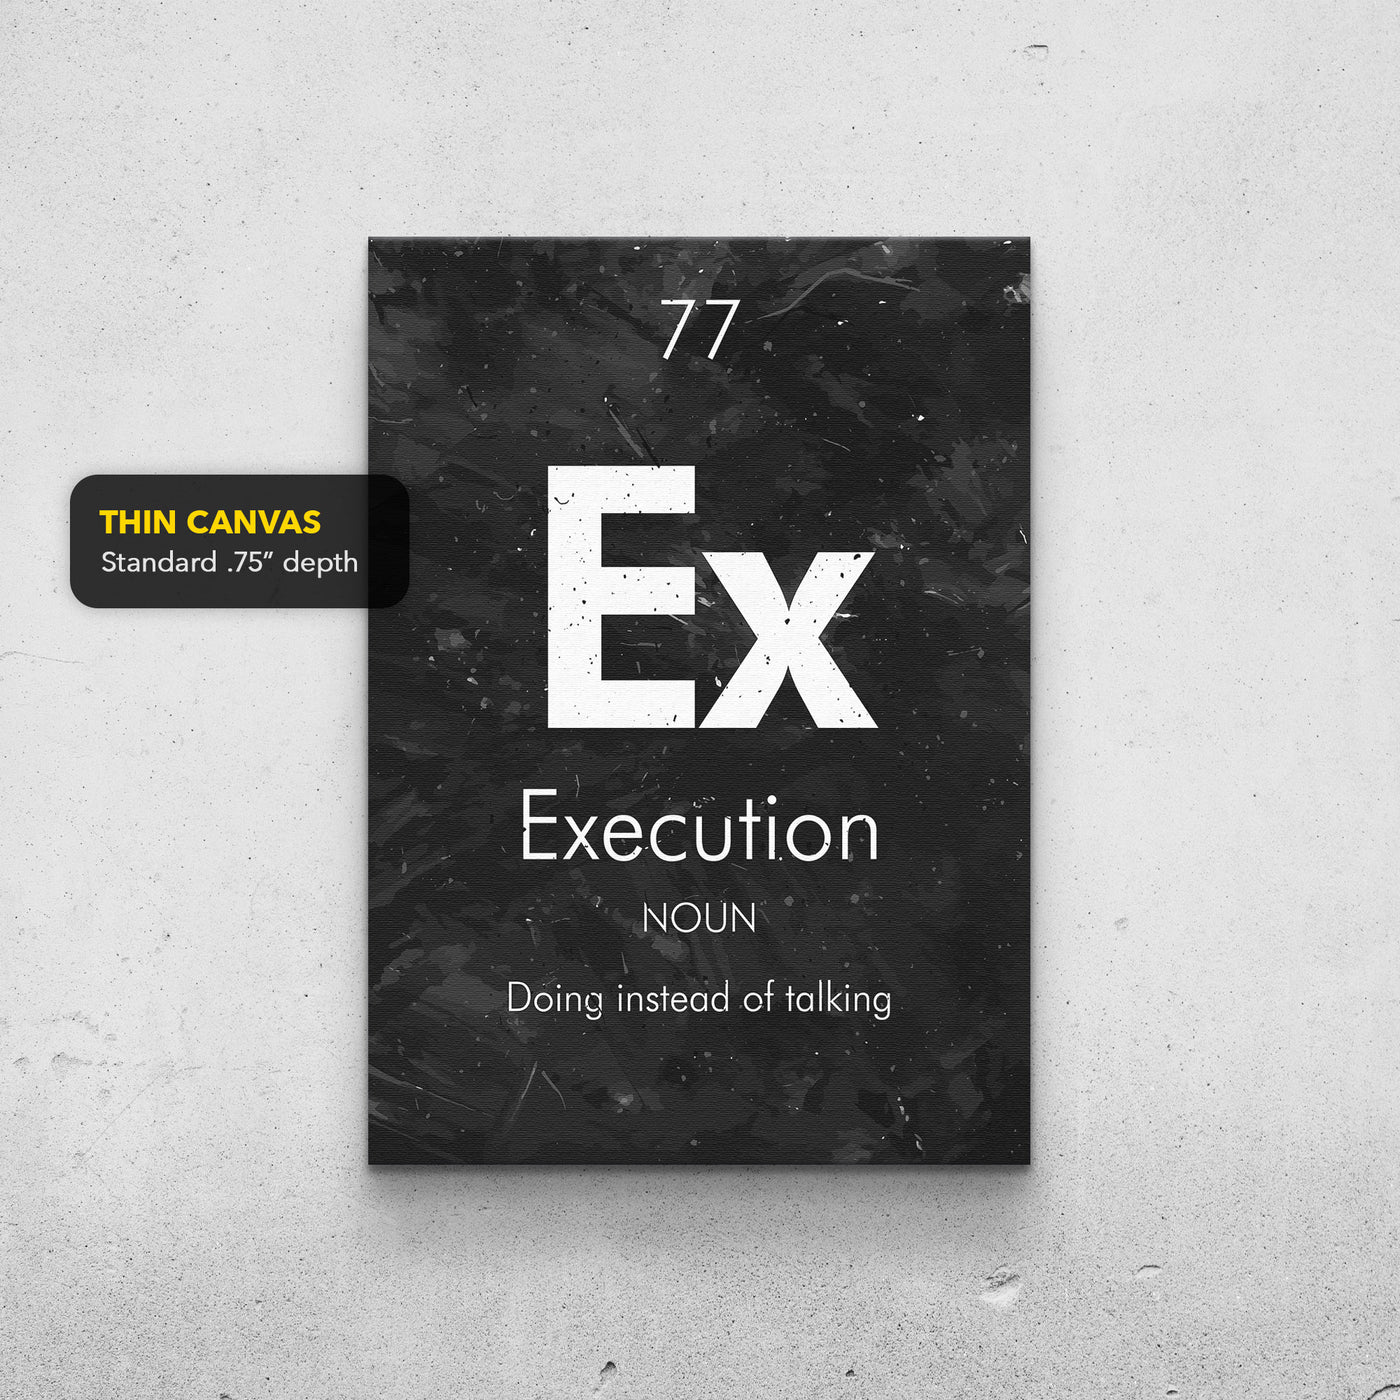 Execution Definition Print TheSuccessCity